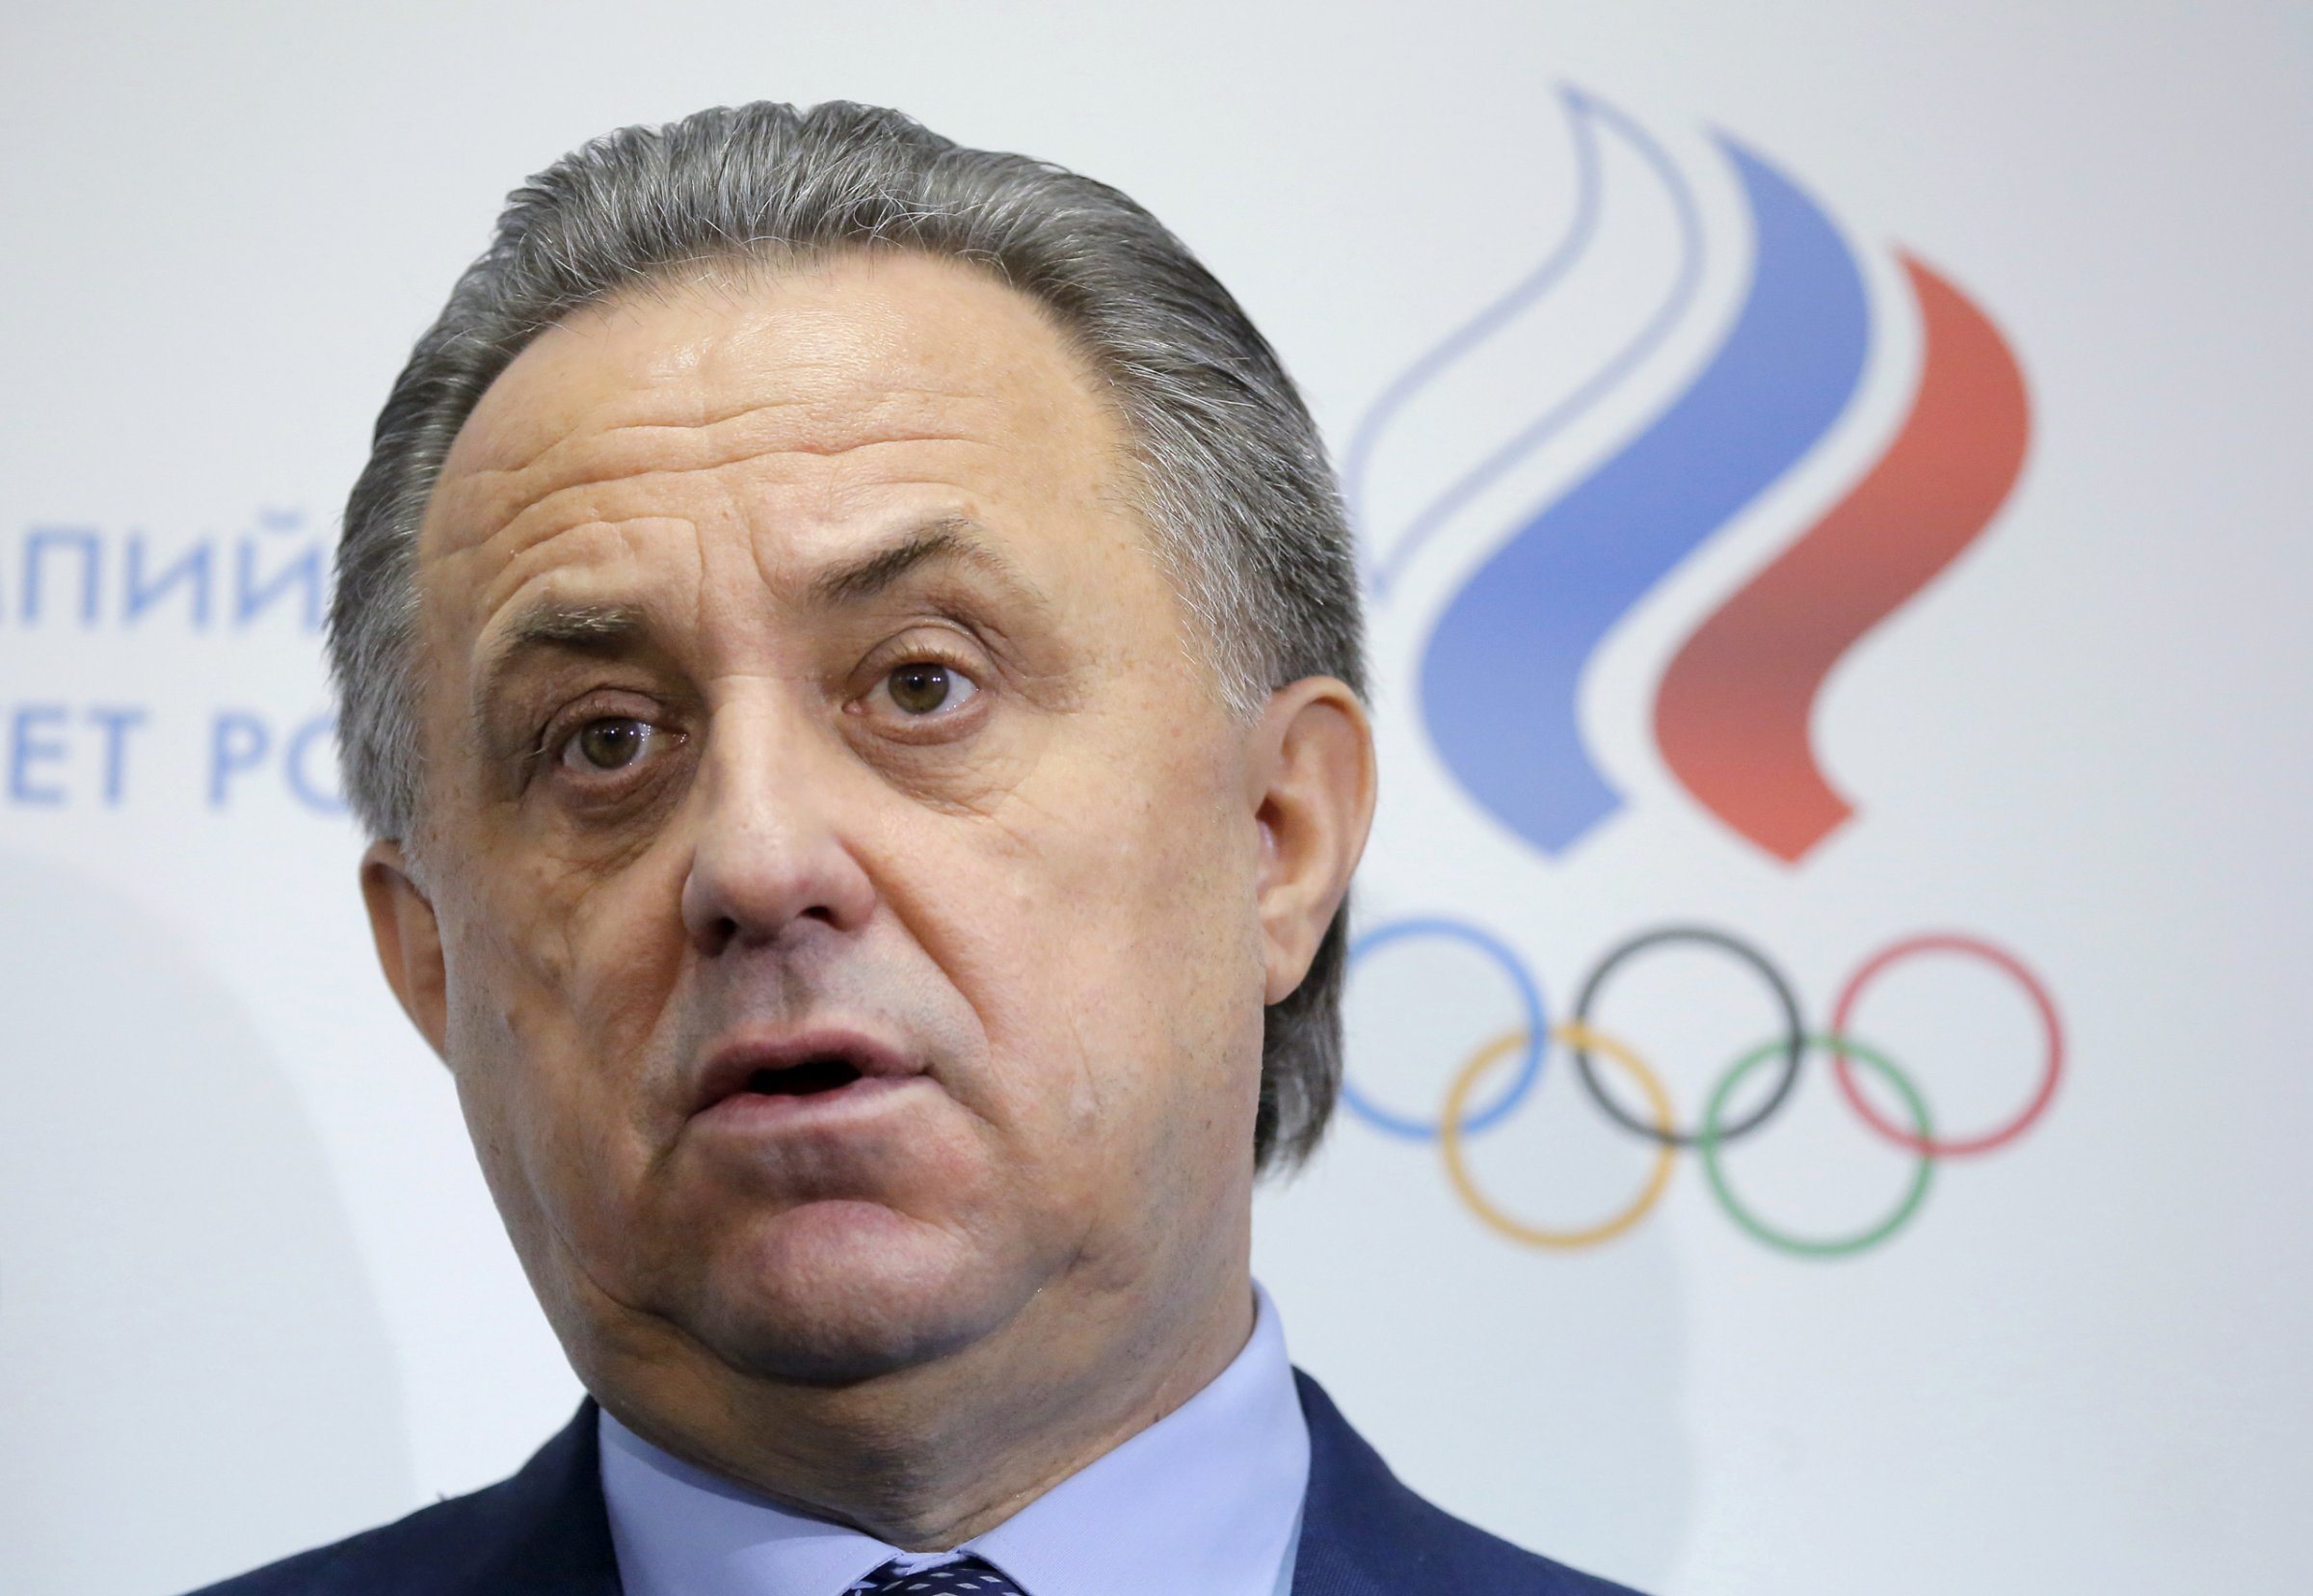 Russian Sports Minister Vitaly Mutko speaks to the media during a news conference following a meeting held to hear reports and elect new officials of Russia's Athletics Federation (ARAF) in Moscow, Russia, January 16, 2016. REUTERS/Maxim Shemetov - RTX22MK7